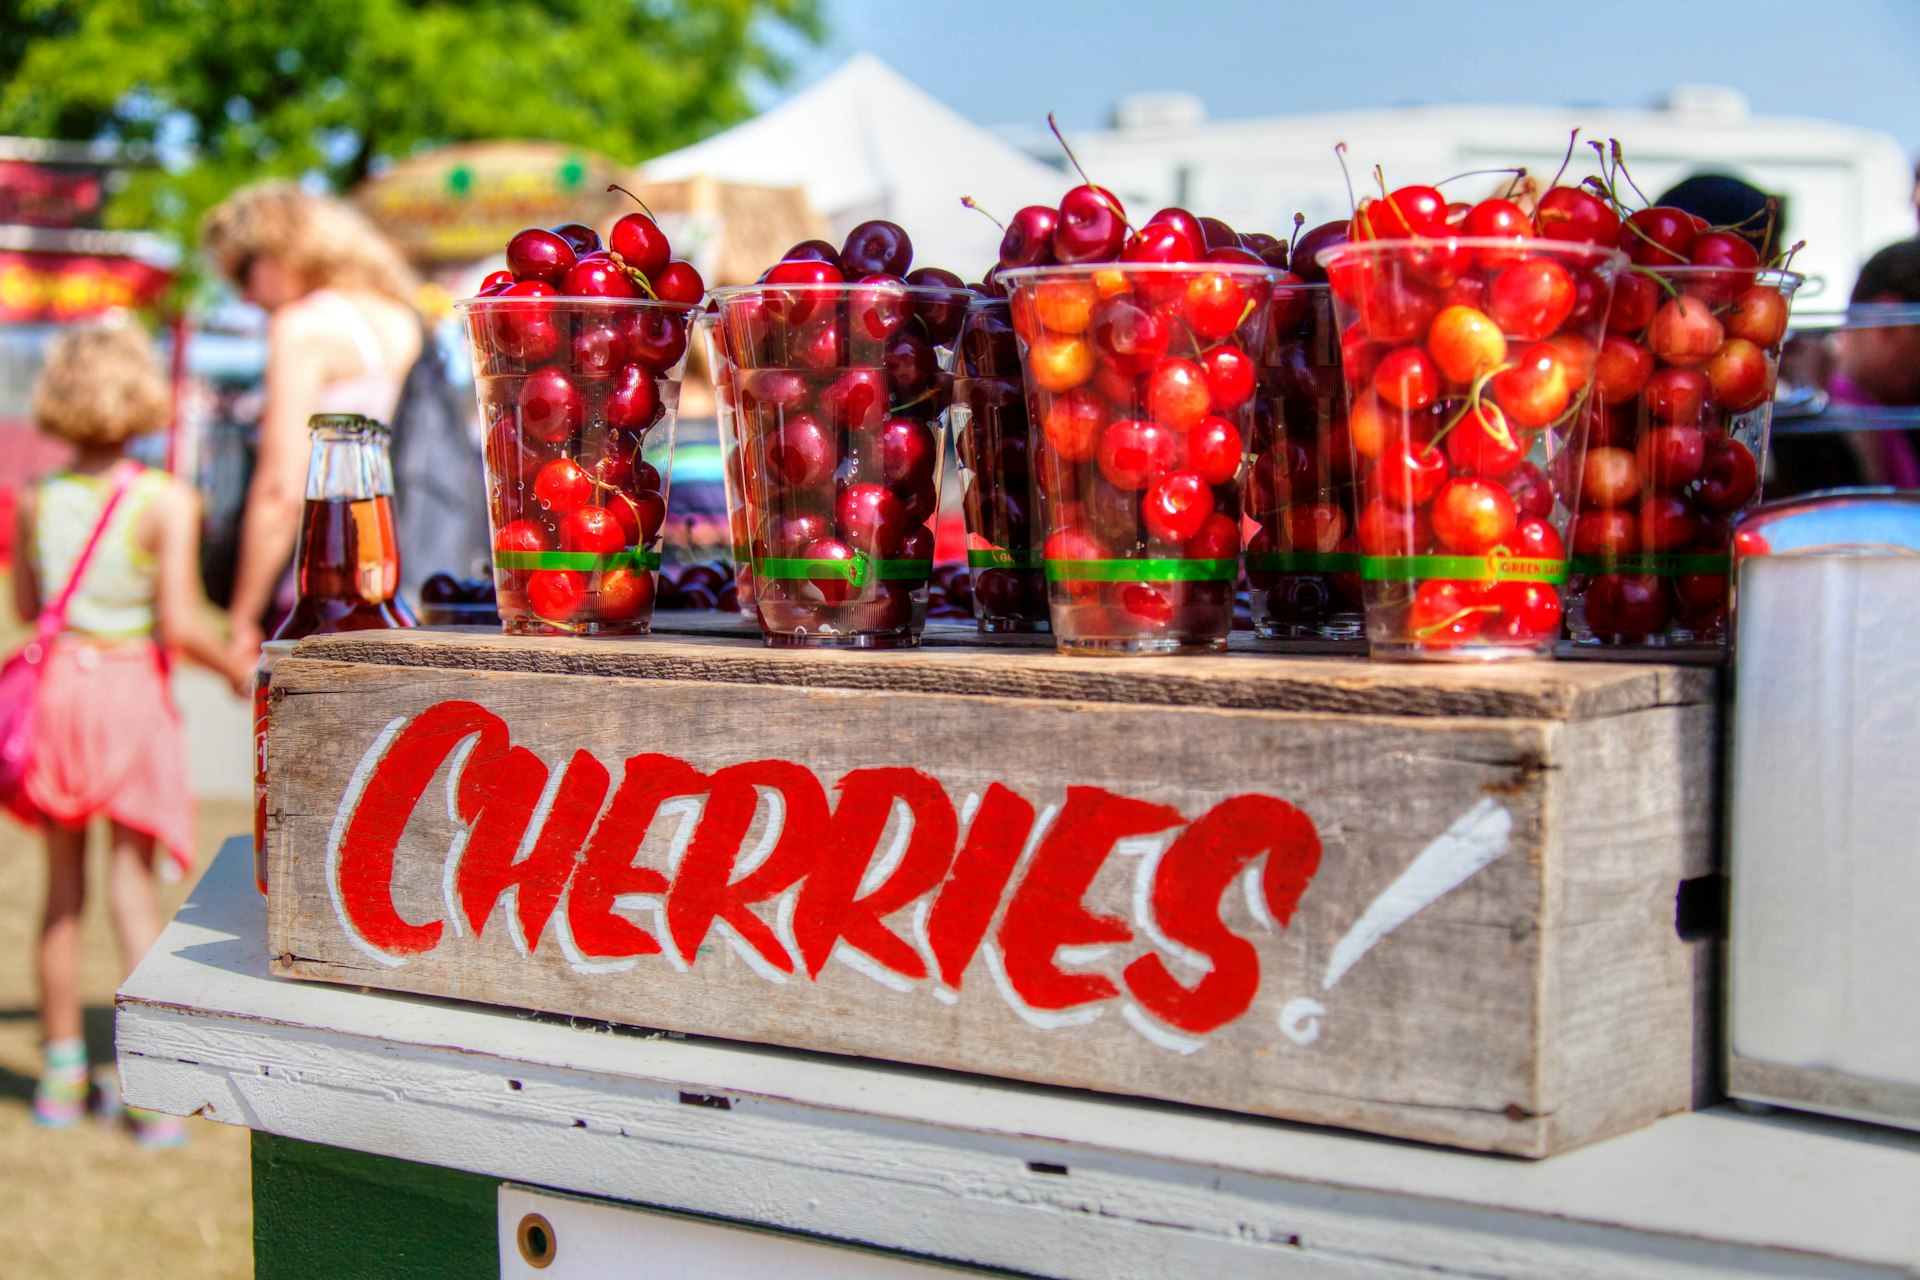 Cups of fresh cherries for sale in Traverse City, Michigan, USA